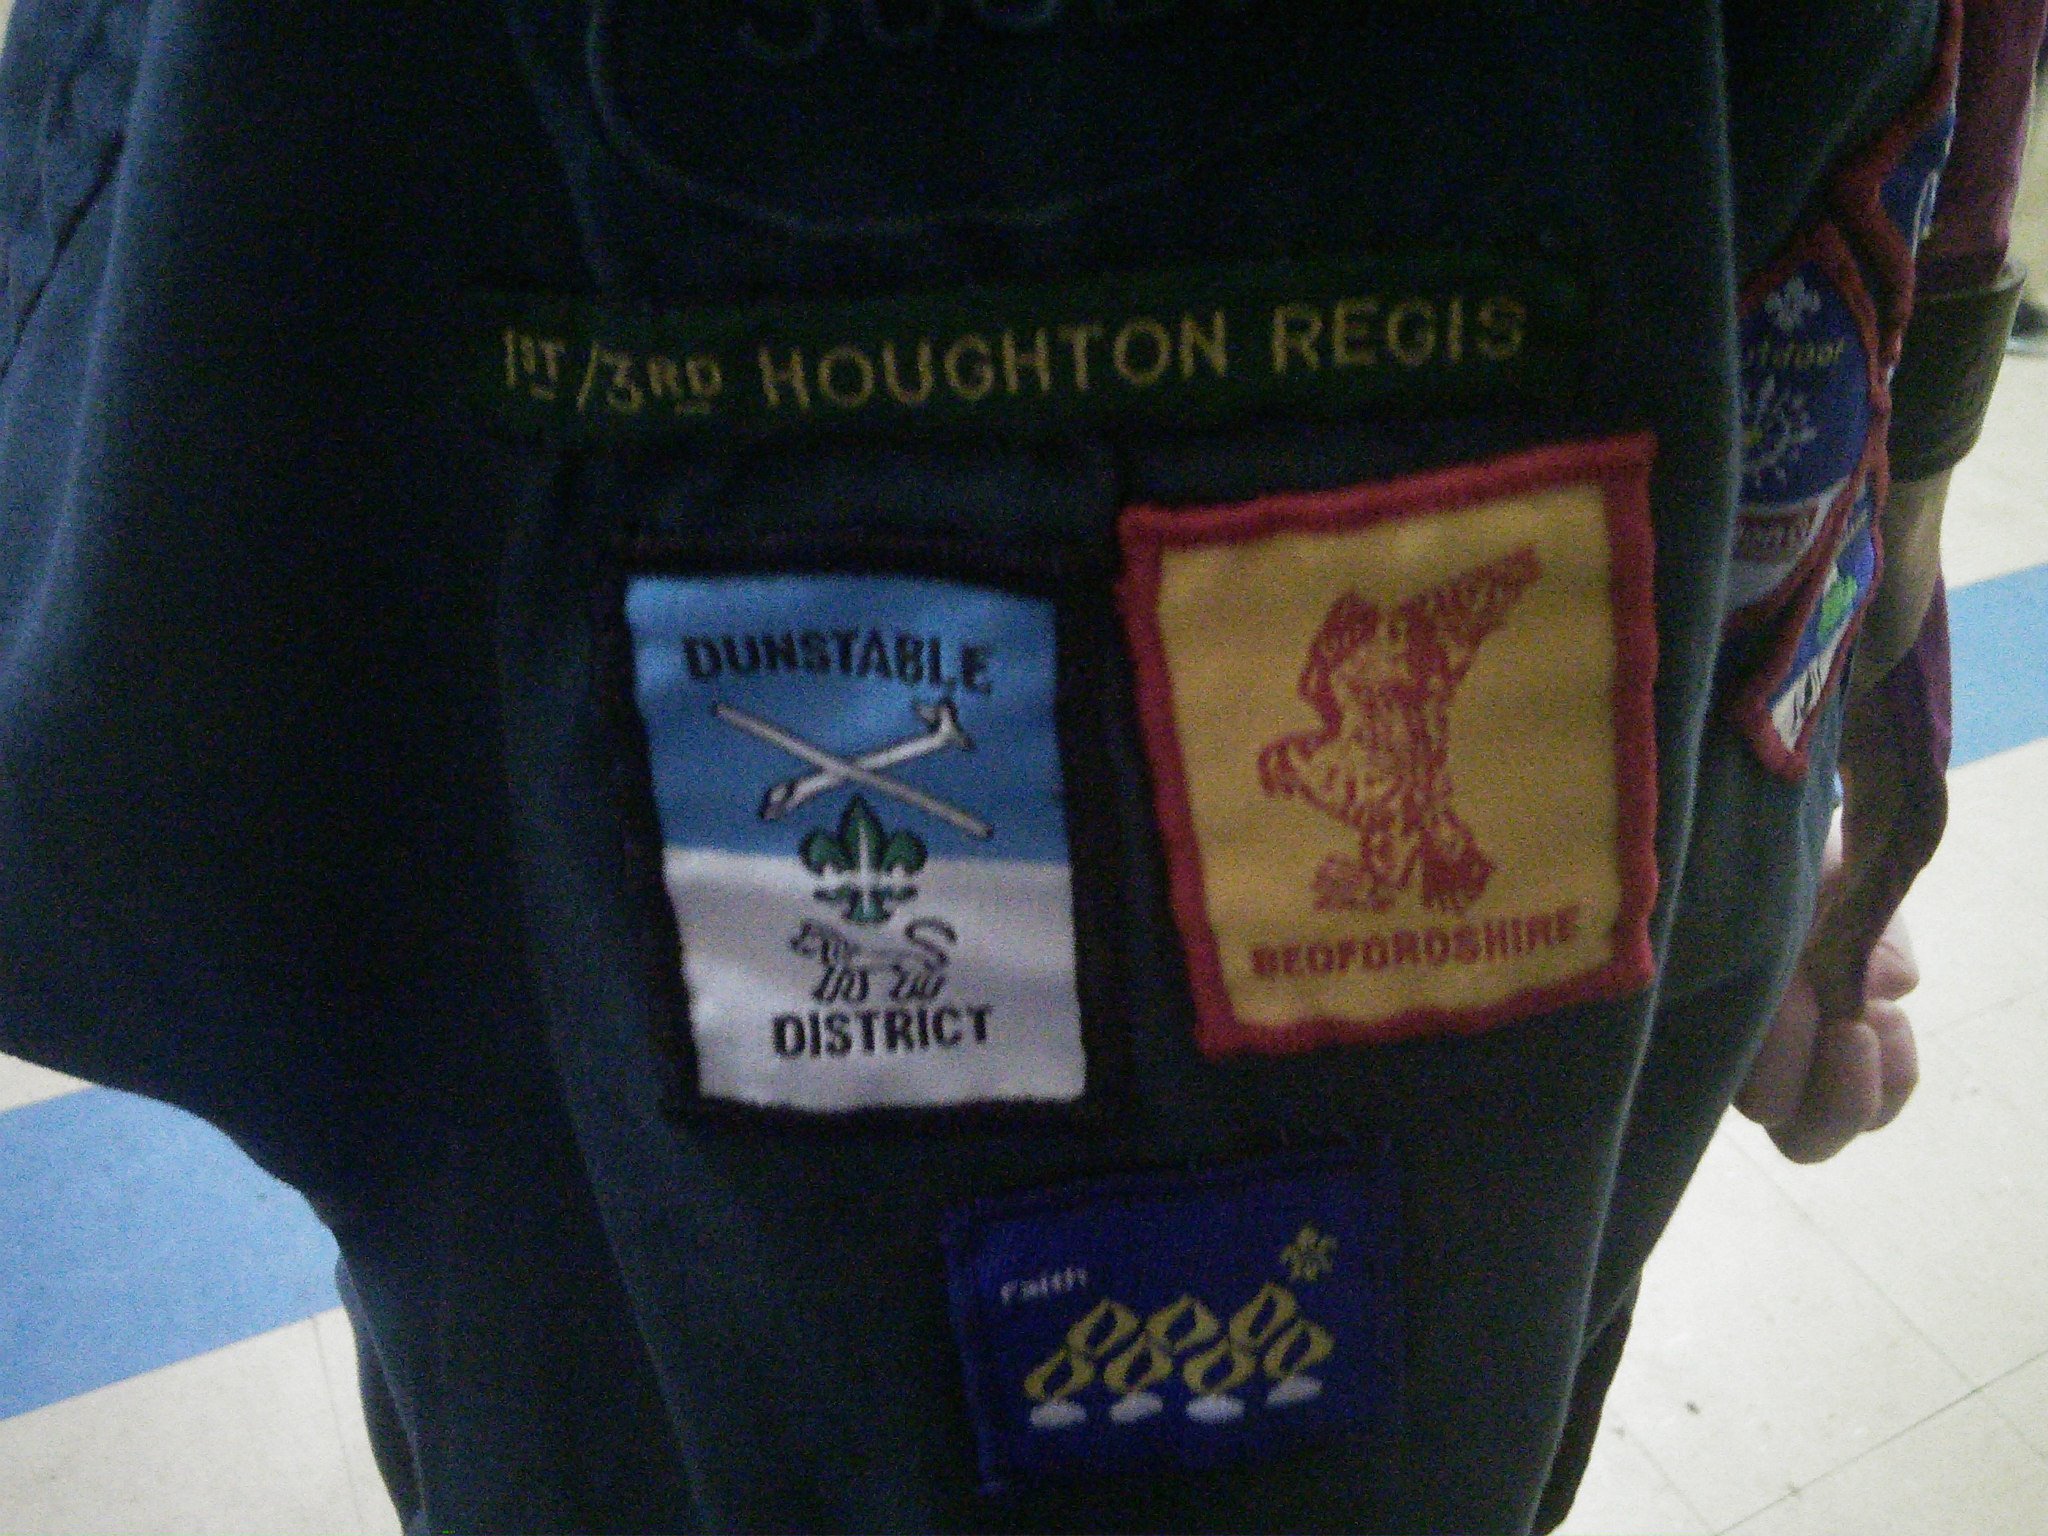 Our Show: 1st & 3rd Houghton Regis (Bedfordshire)